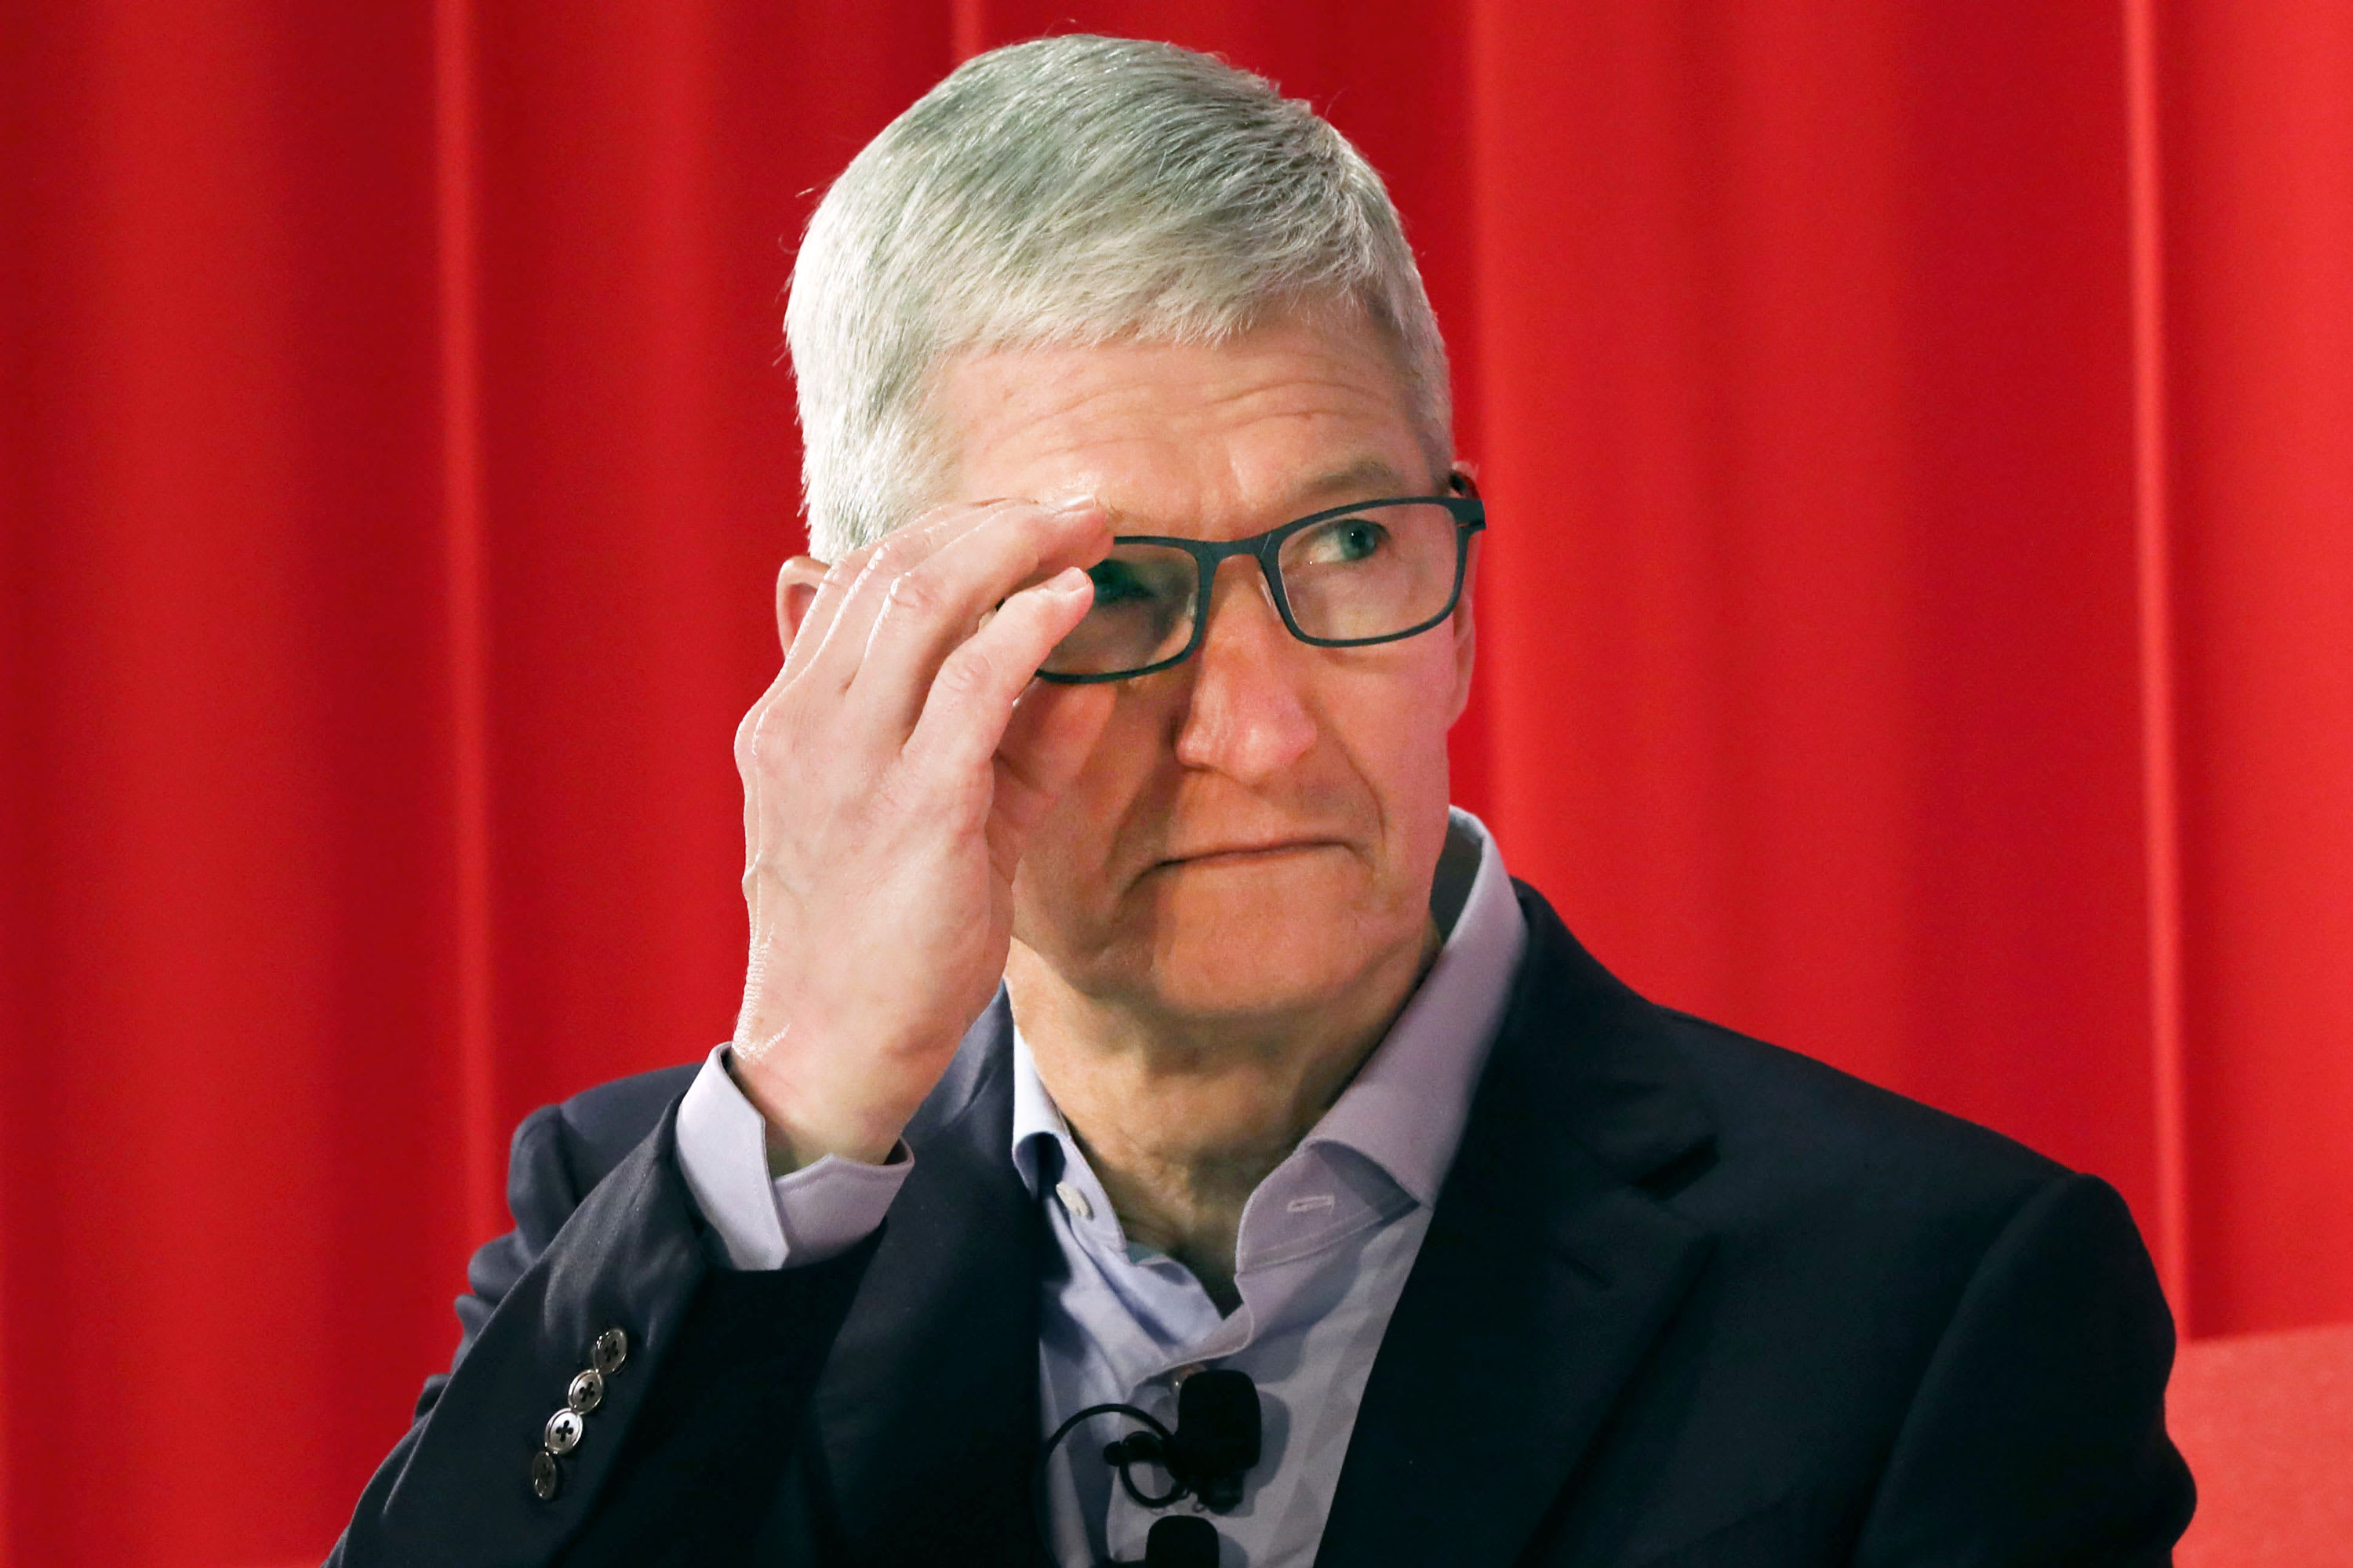 Tim Cook says Apple has shut one store in China and is restricting employee travel because of coronavirus